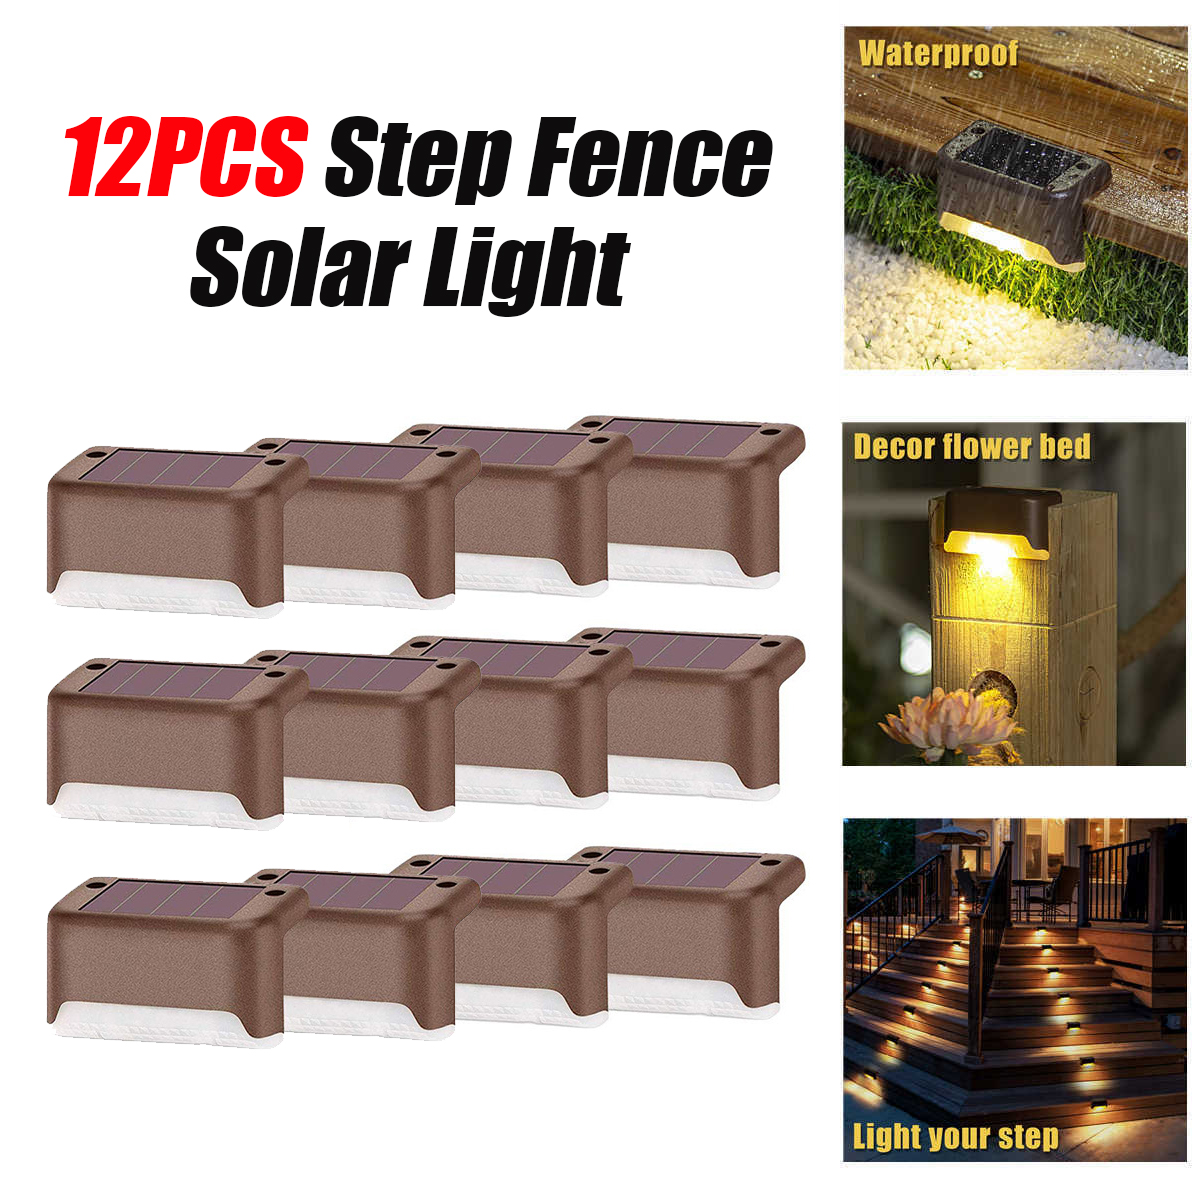 12PCS-Solar-Powered-LED-Stairs-Step-Fence-Lights-Deck-Bed-Outdoor-Path-1689908-1